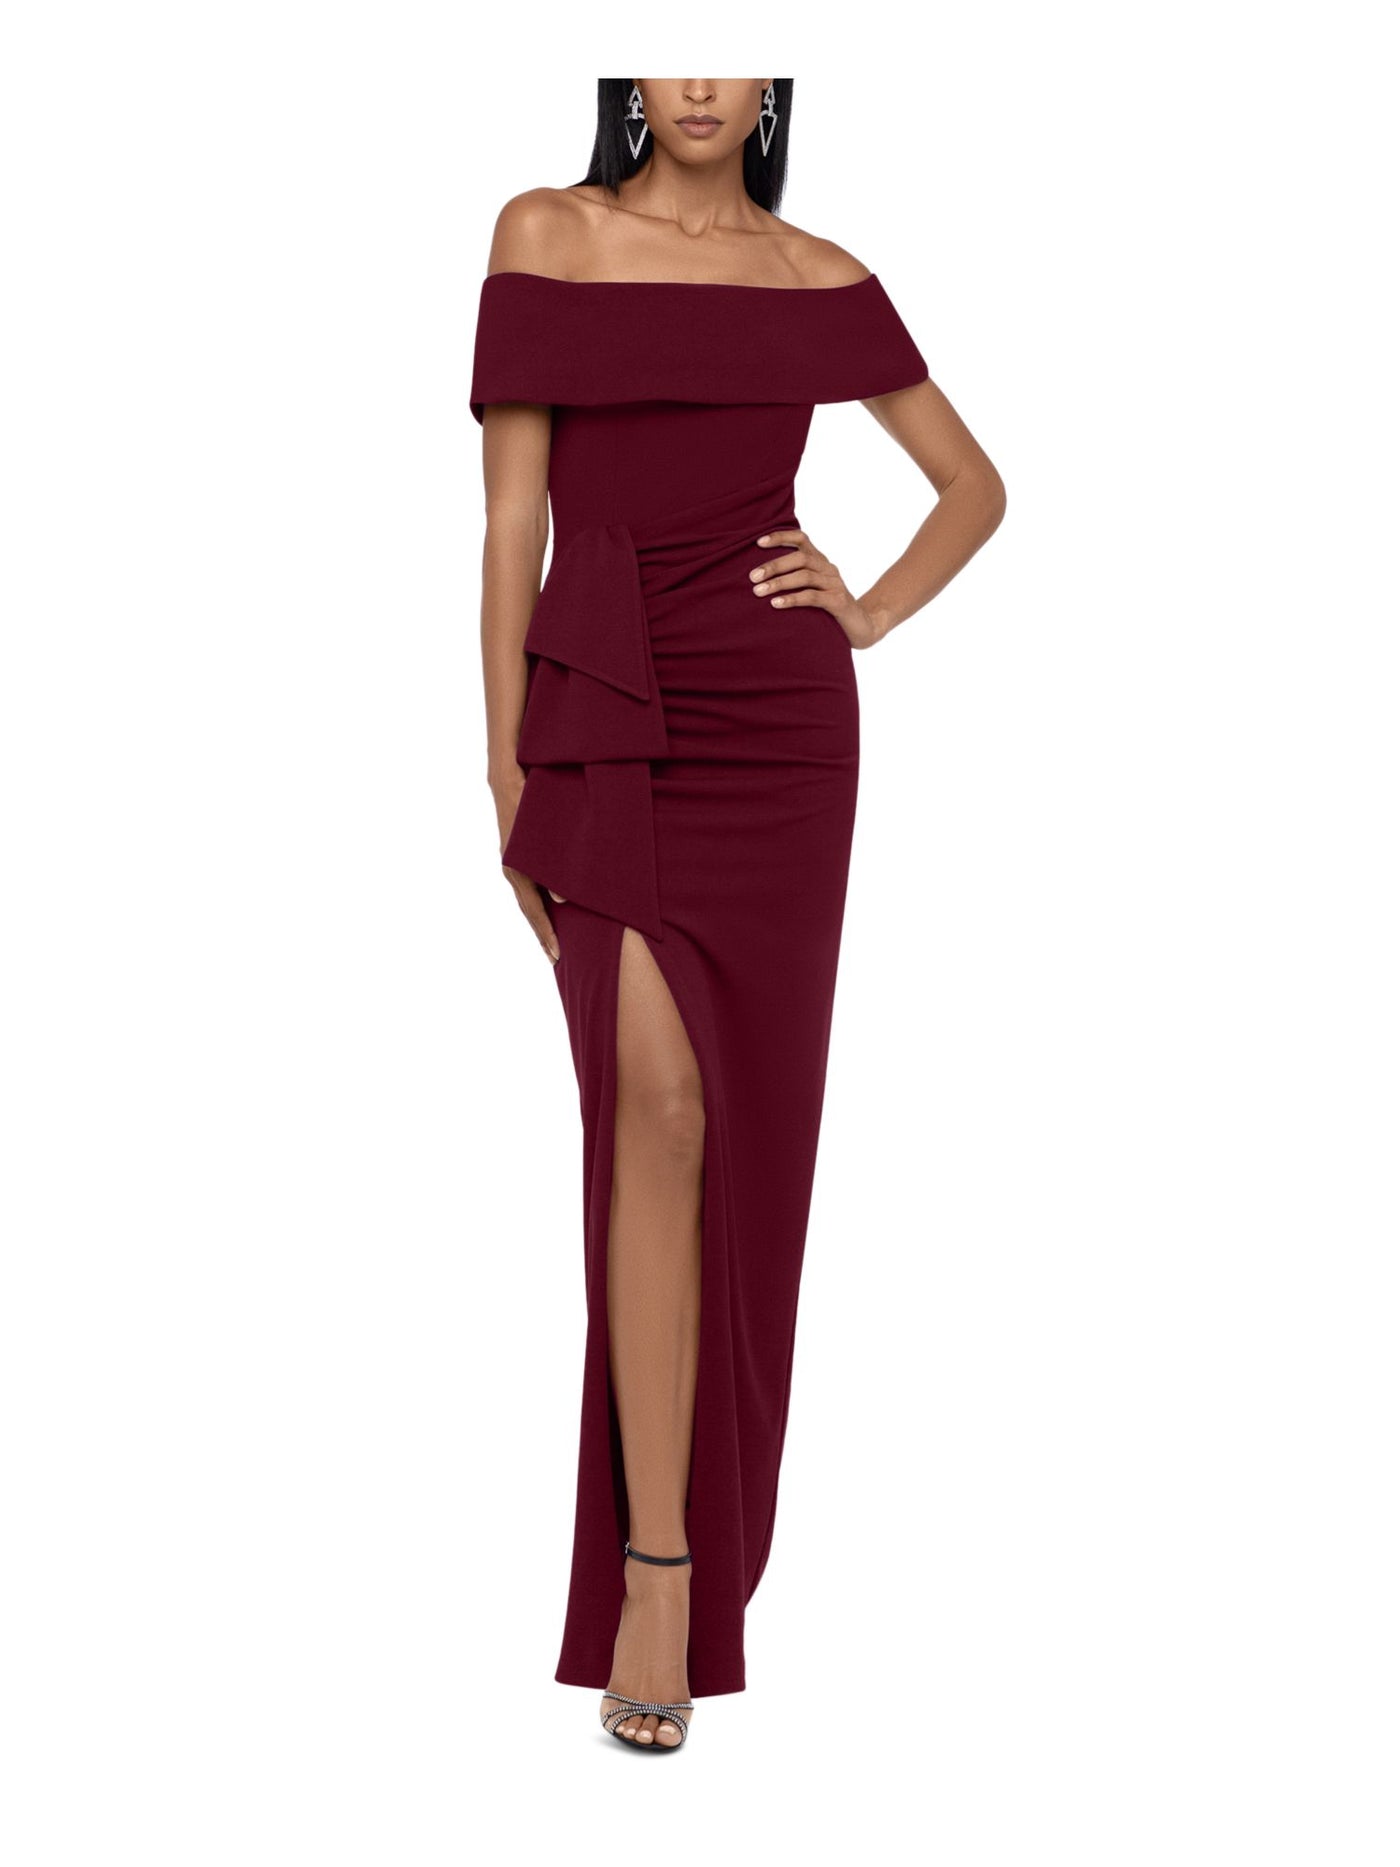 XSCAPE Womens Burgundy Zippered Slitted Lined Ruched Ruffled Short Sleeve Off Shoulder Full-Length Evening Gown Dress 10